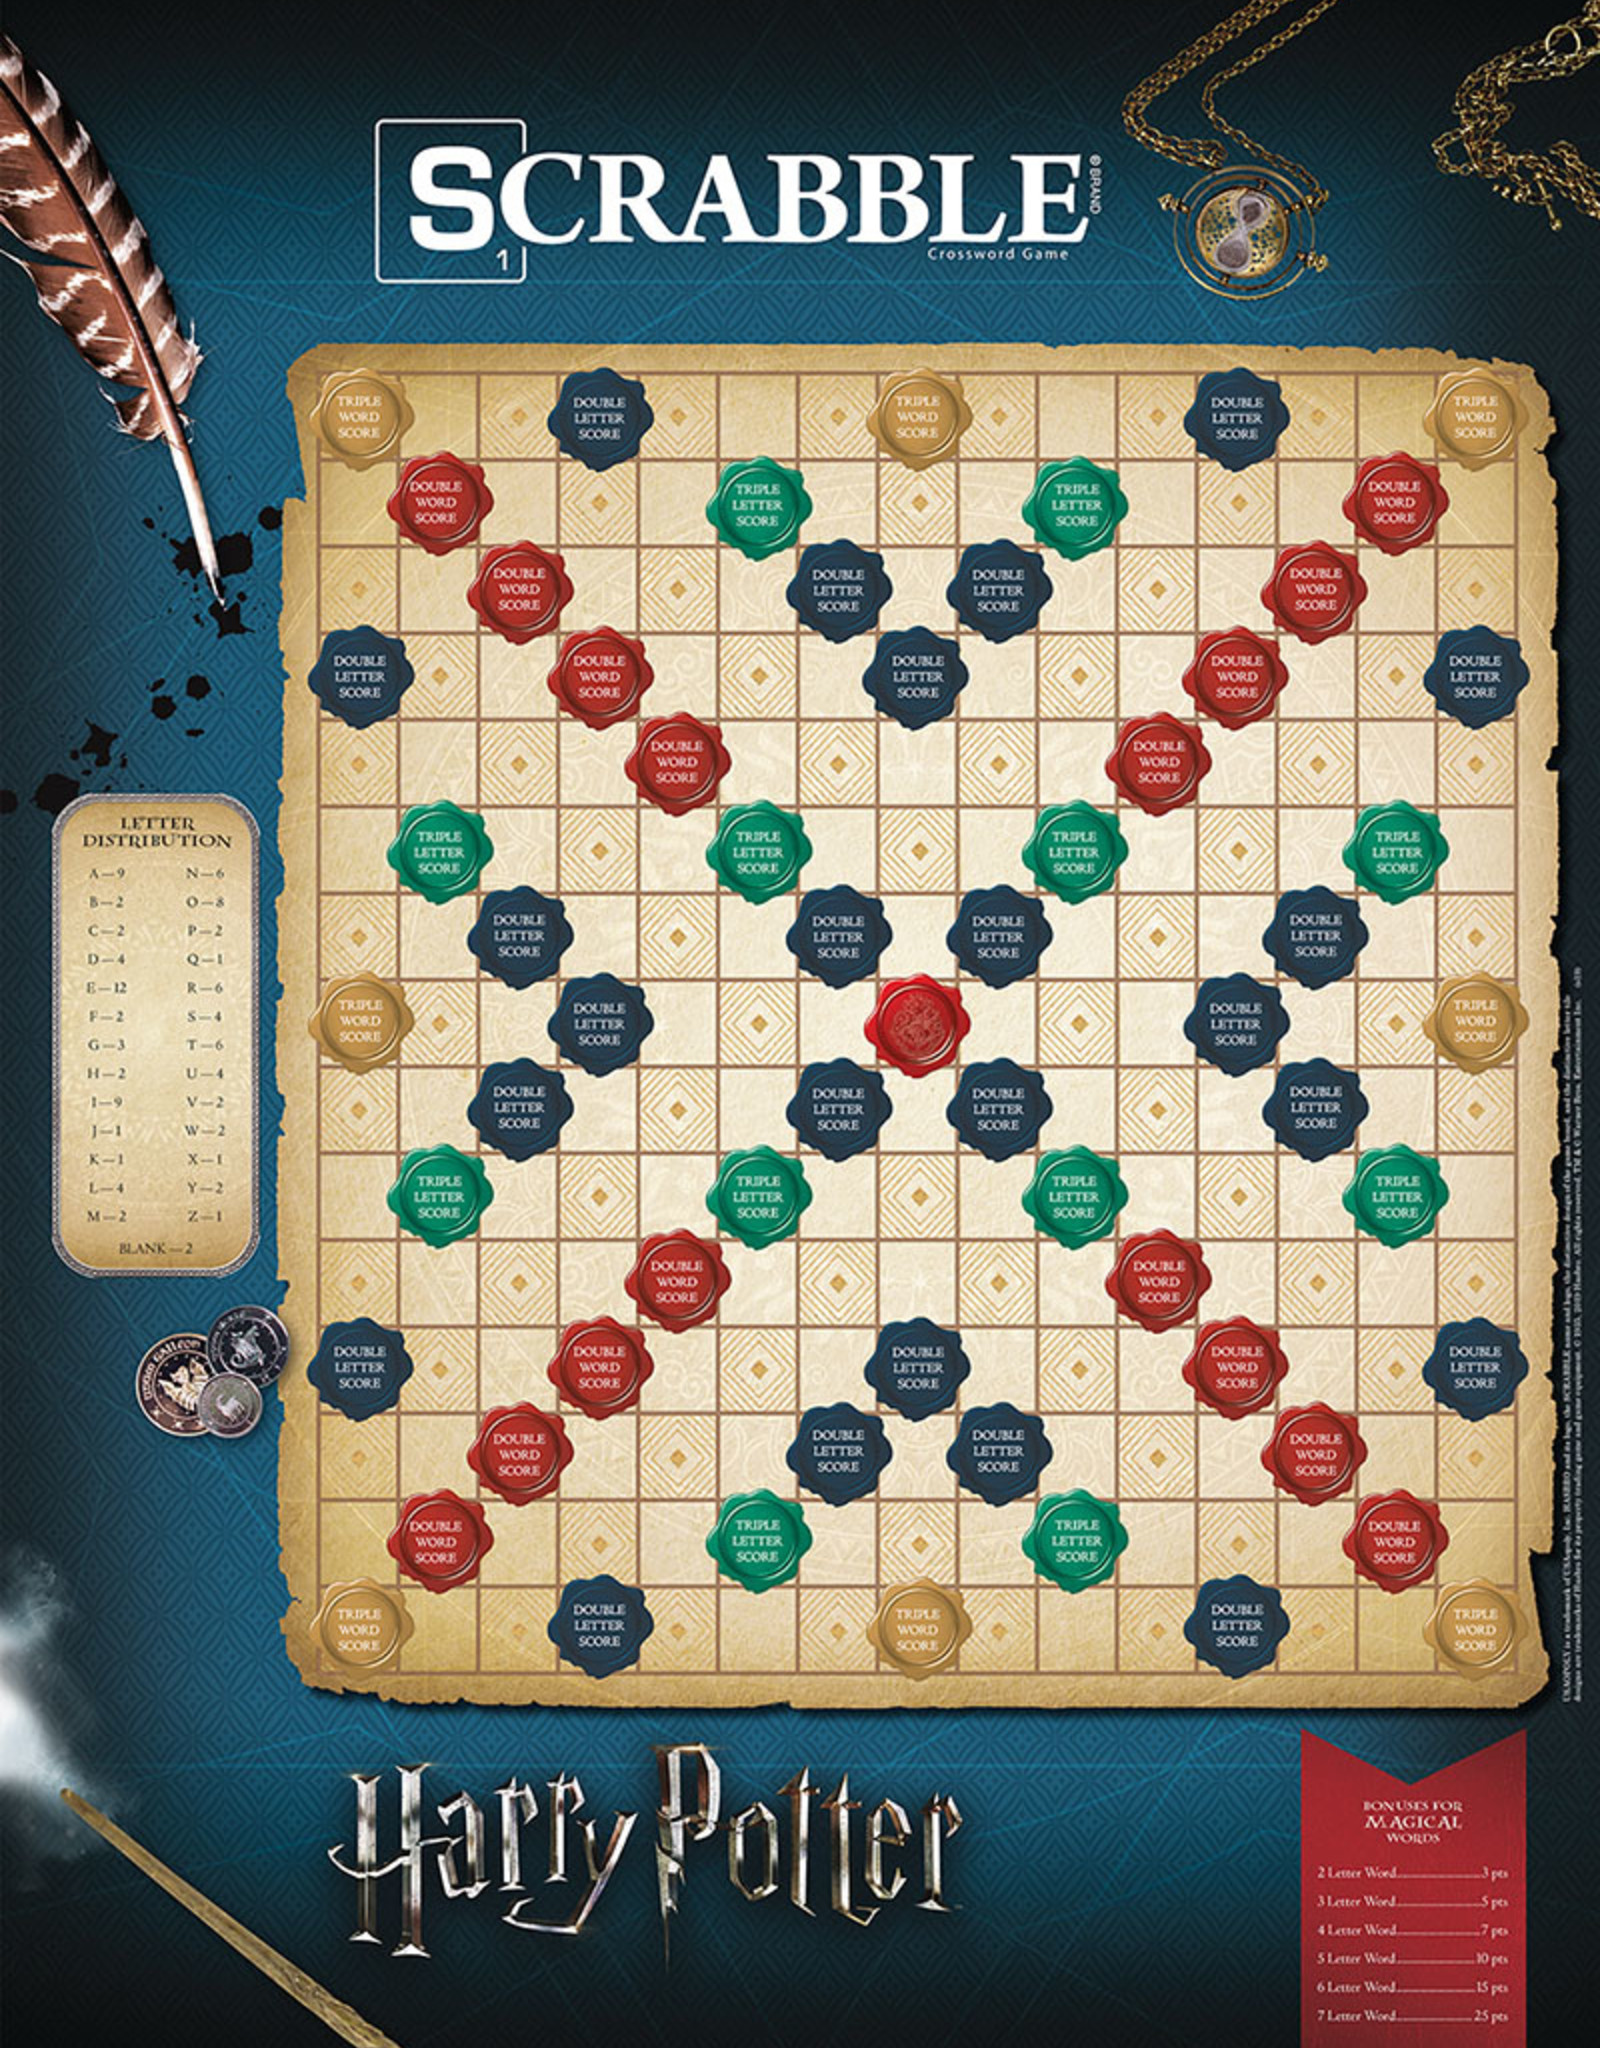 USAopoly Scrabble Harry Potter